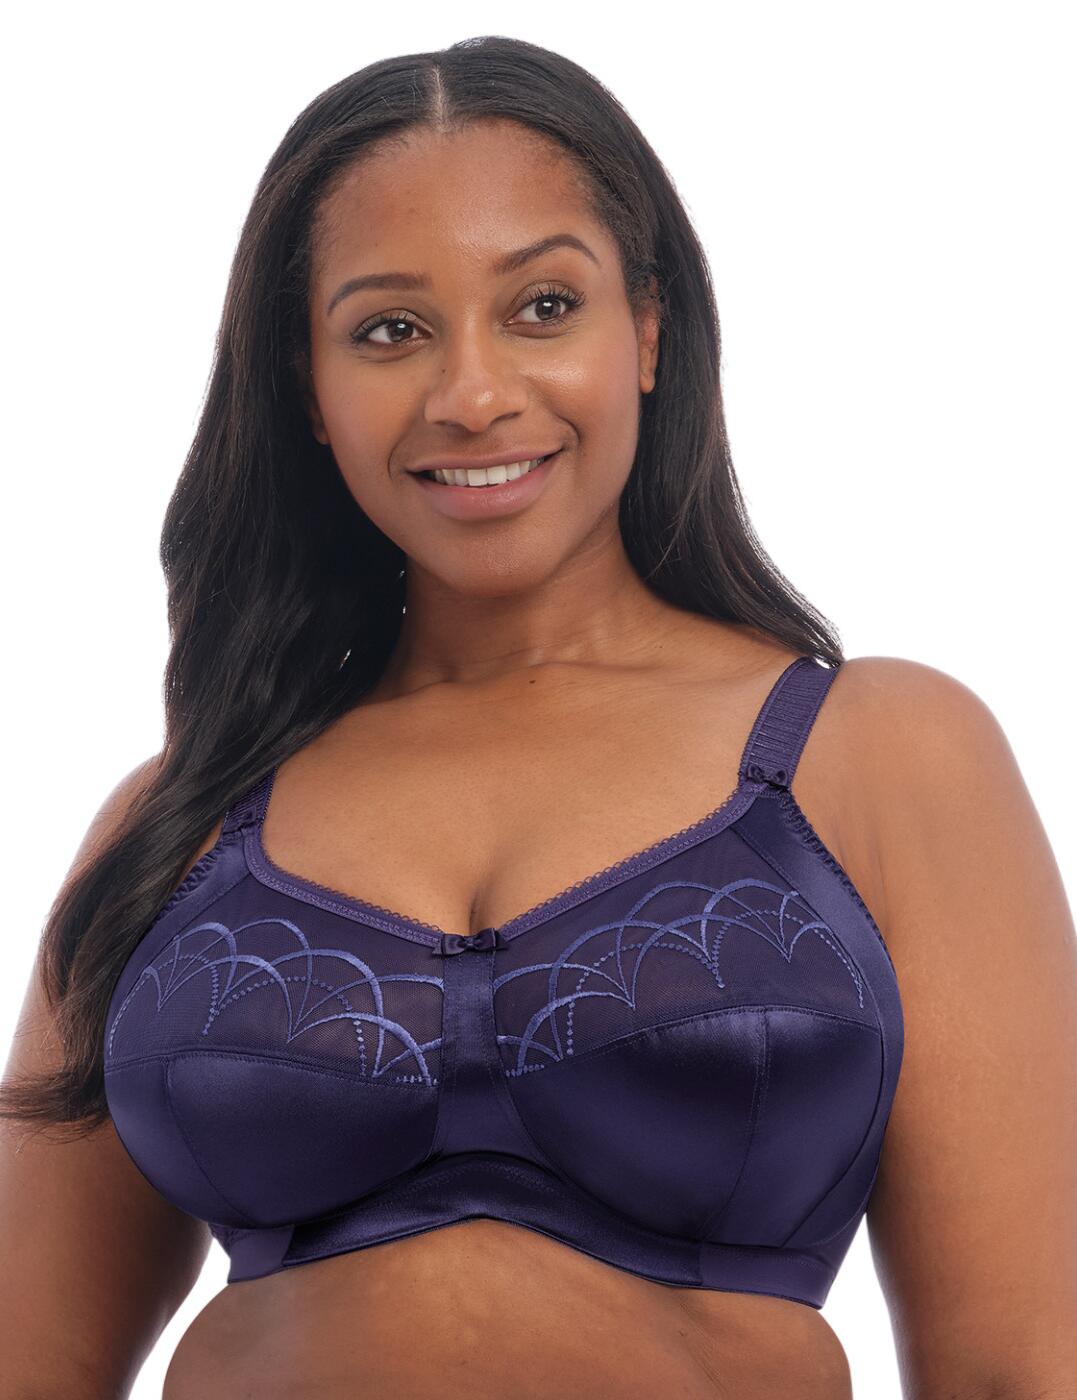 What Is A Non Wired Bra?